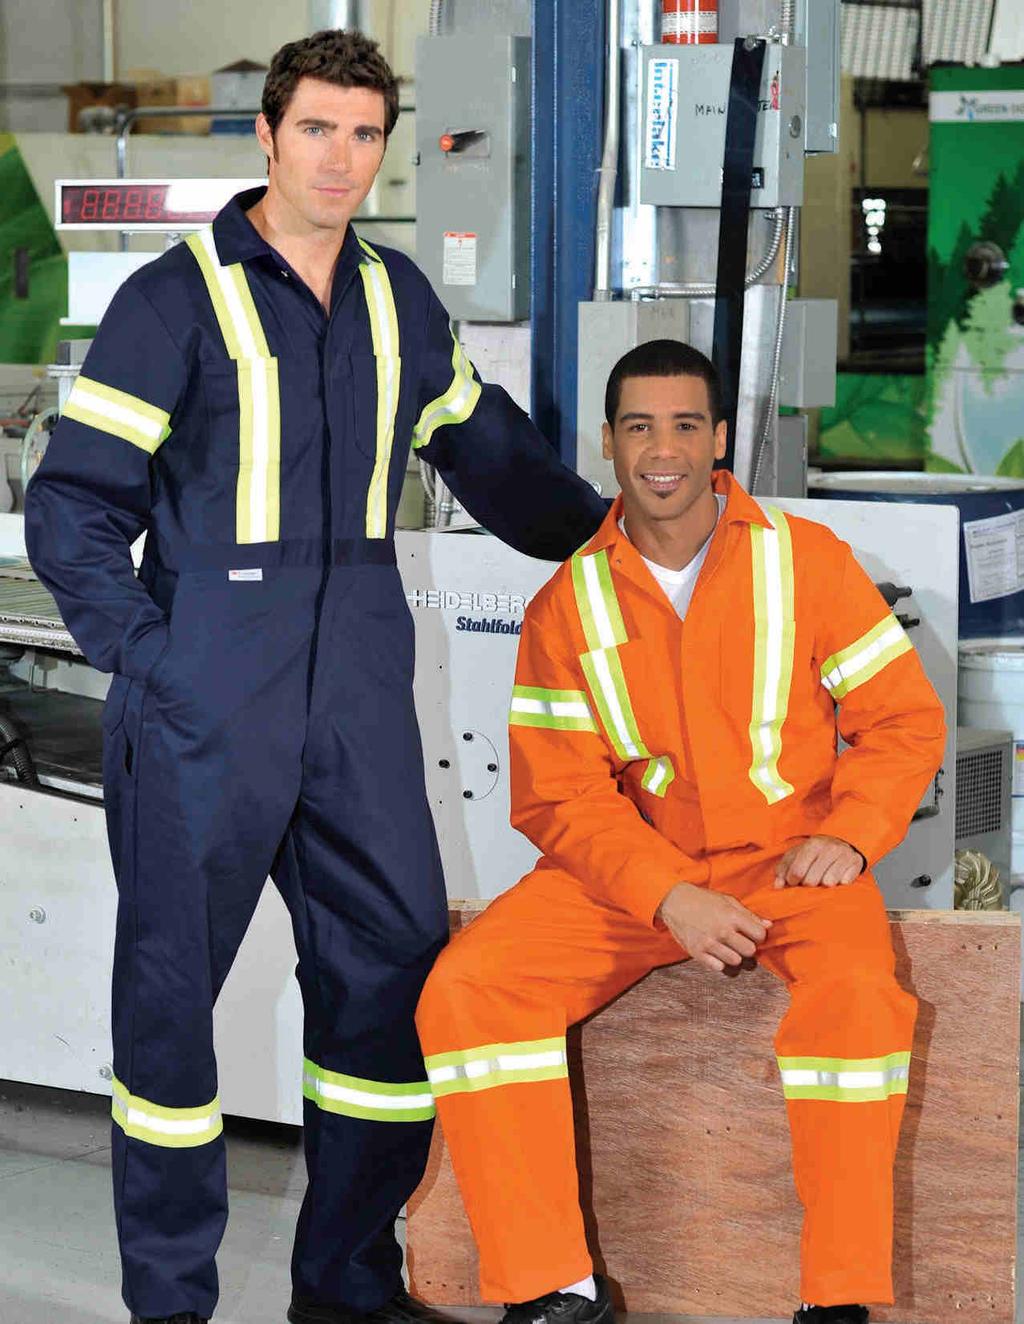 100% Cotton COVERALLS Cotton Coveralls with Reflective Tape Sizes range from 36-60